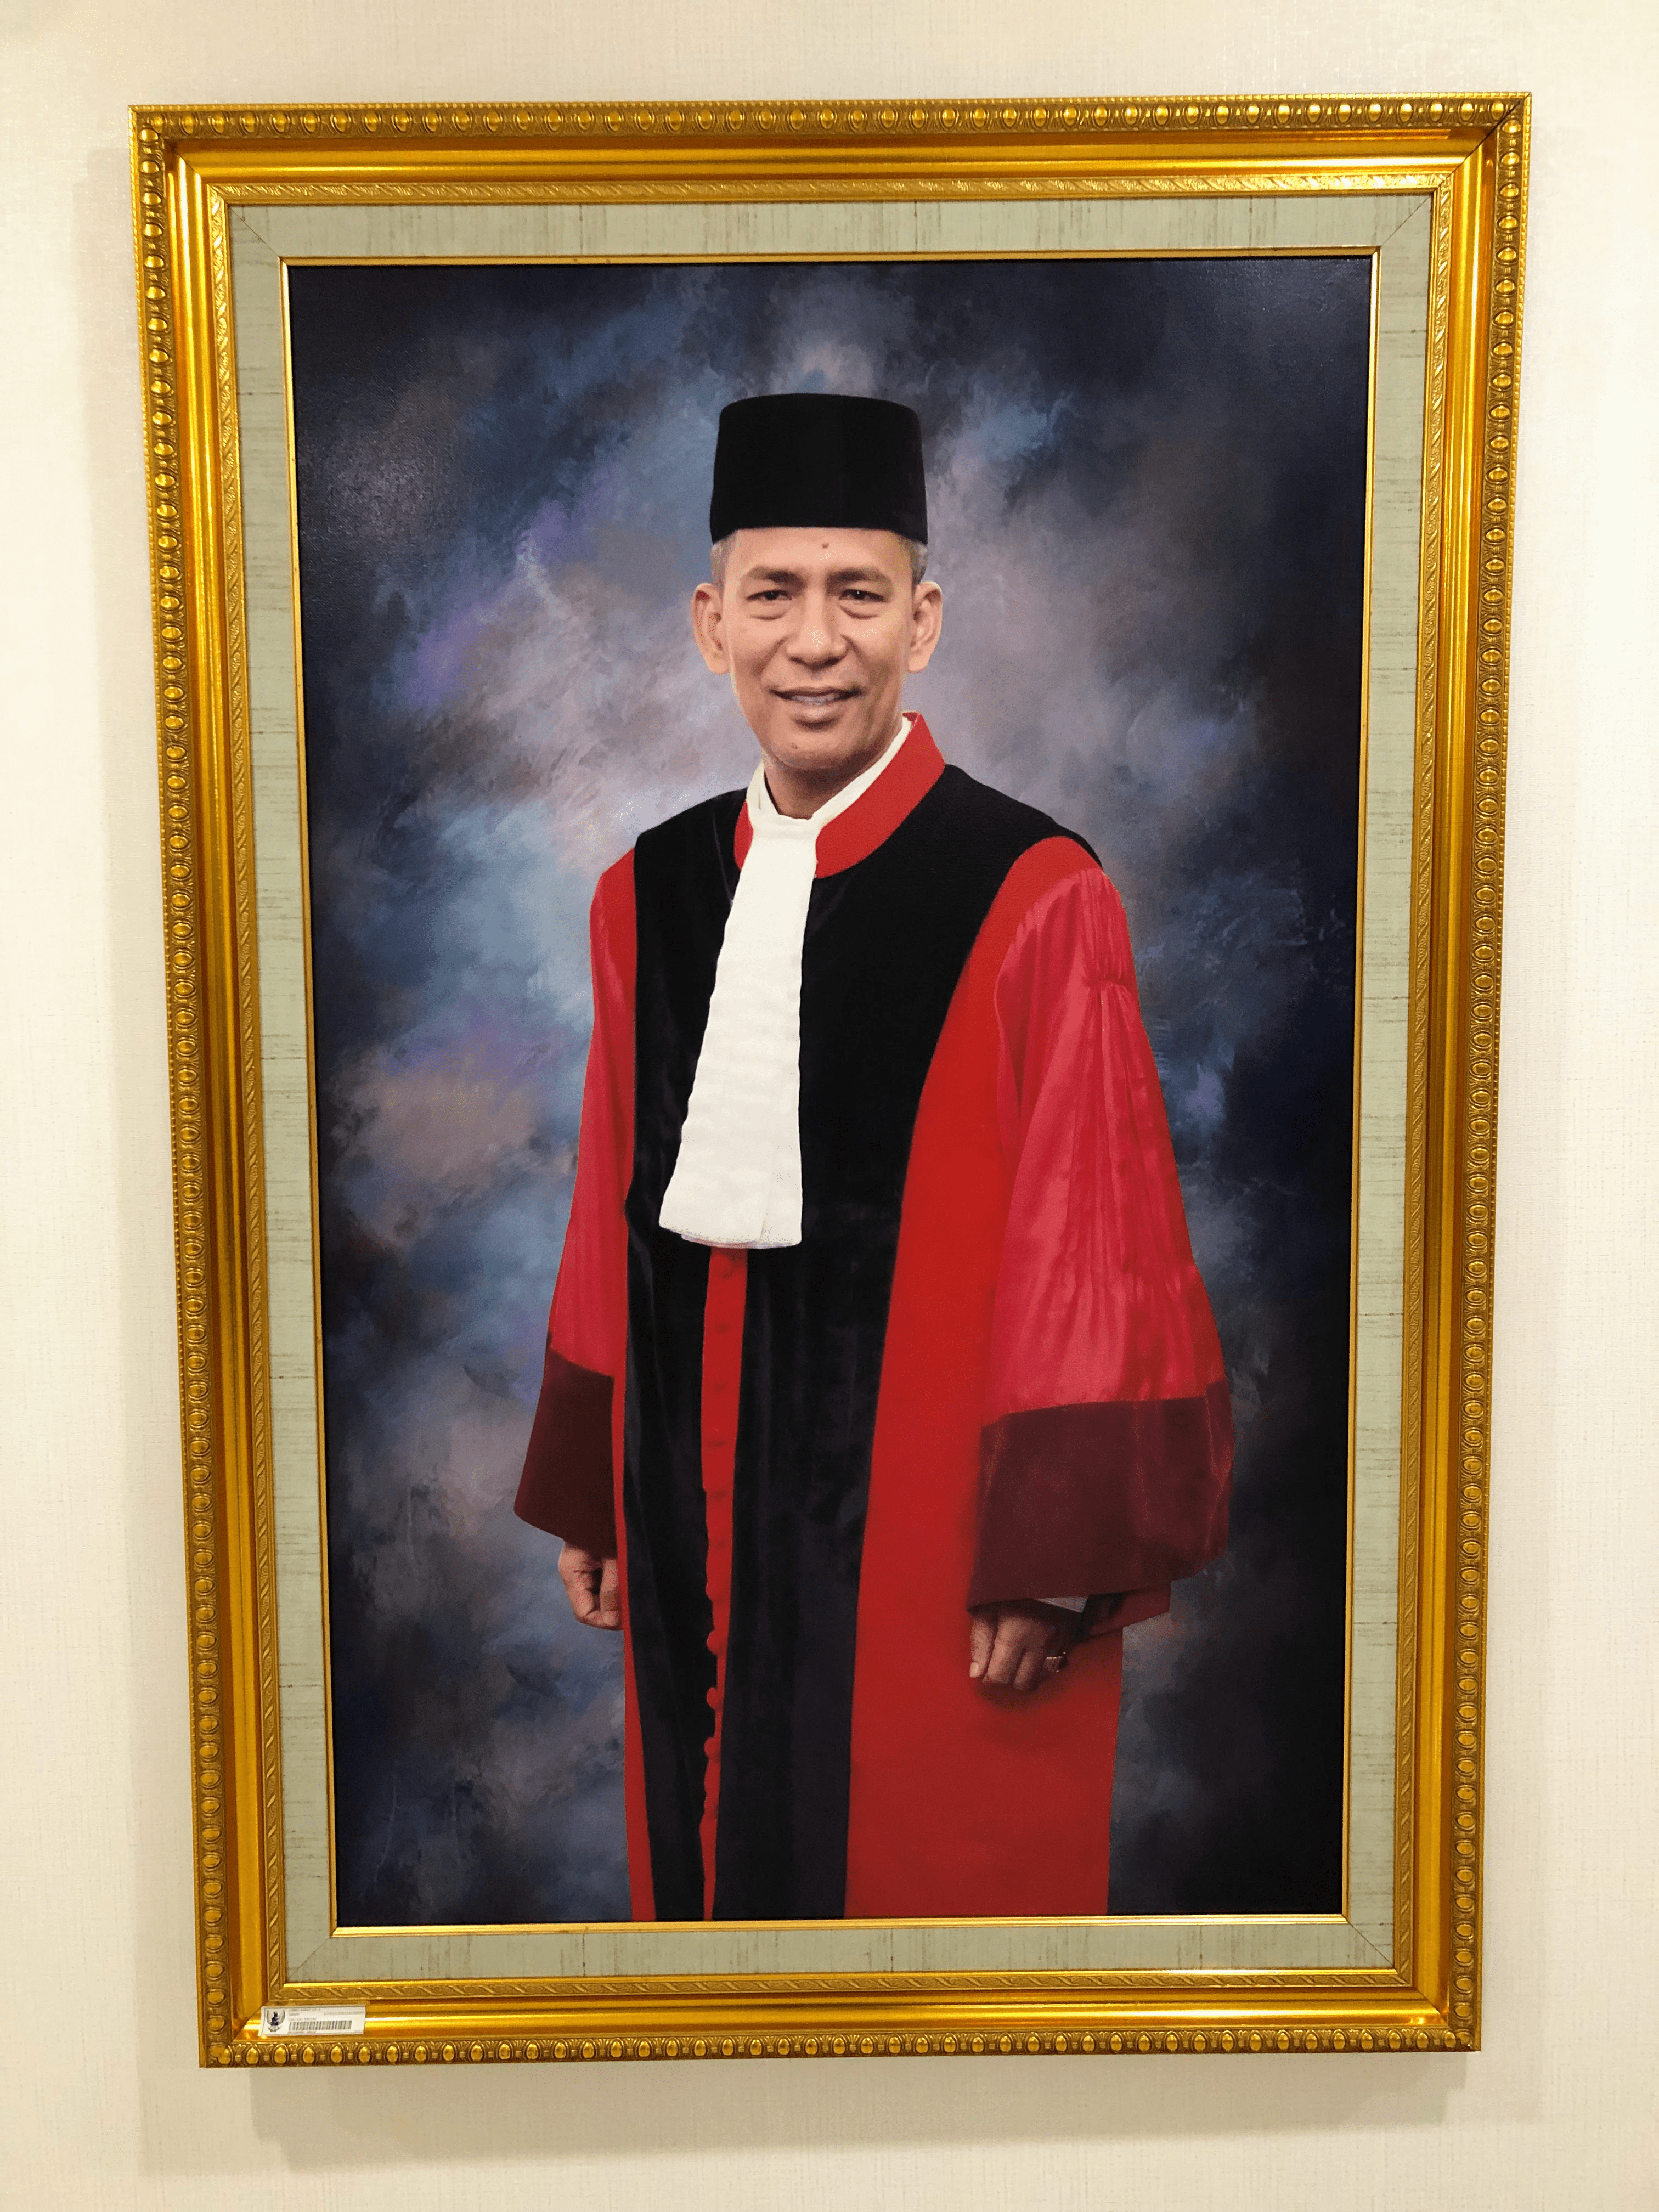 I haven't yet asked to take a picture with Justice Saldi, but here is his court portrait in his judicial dress.